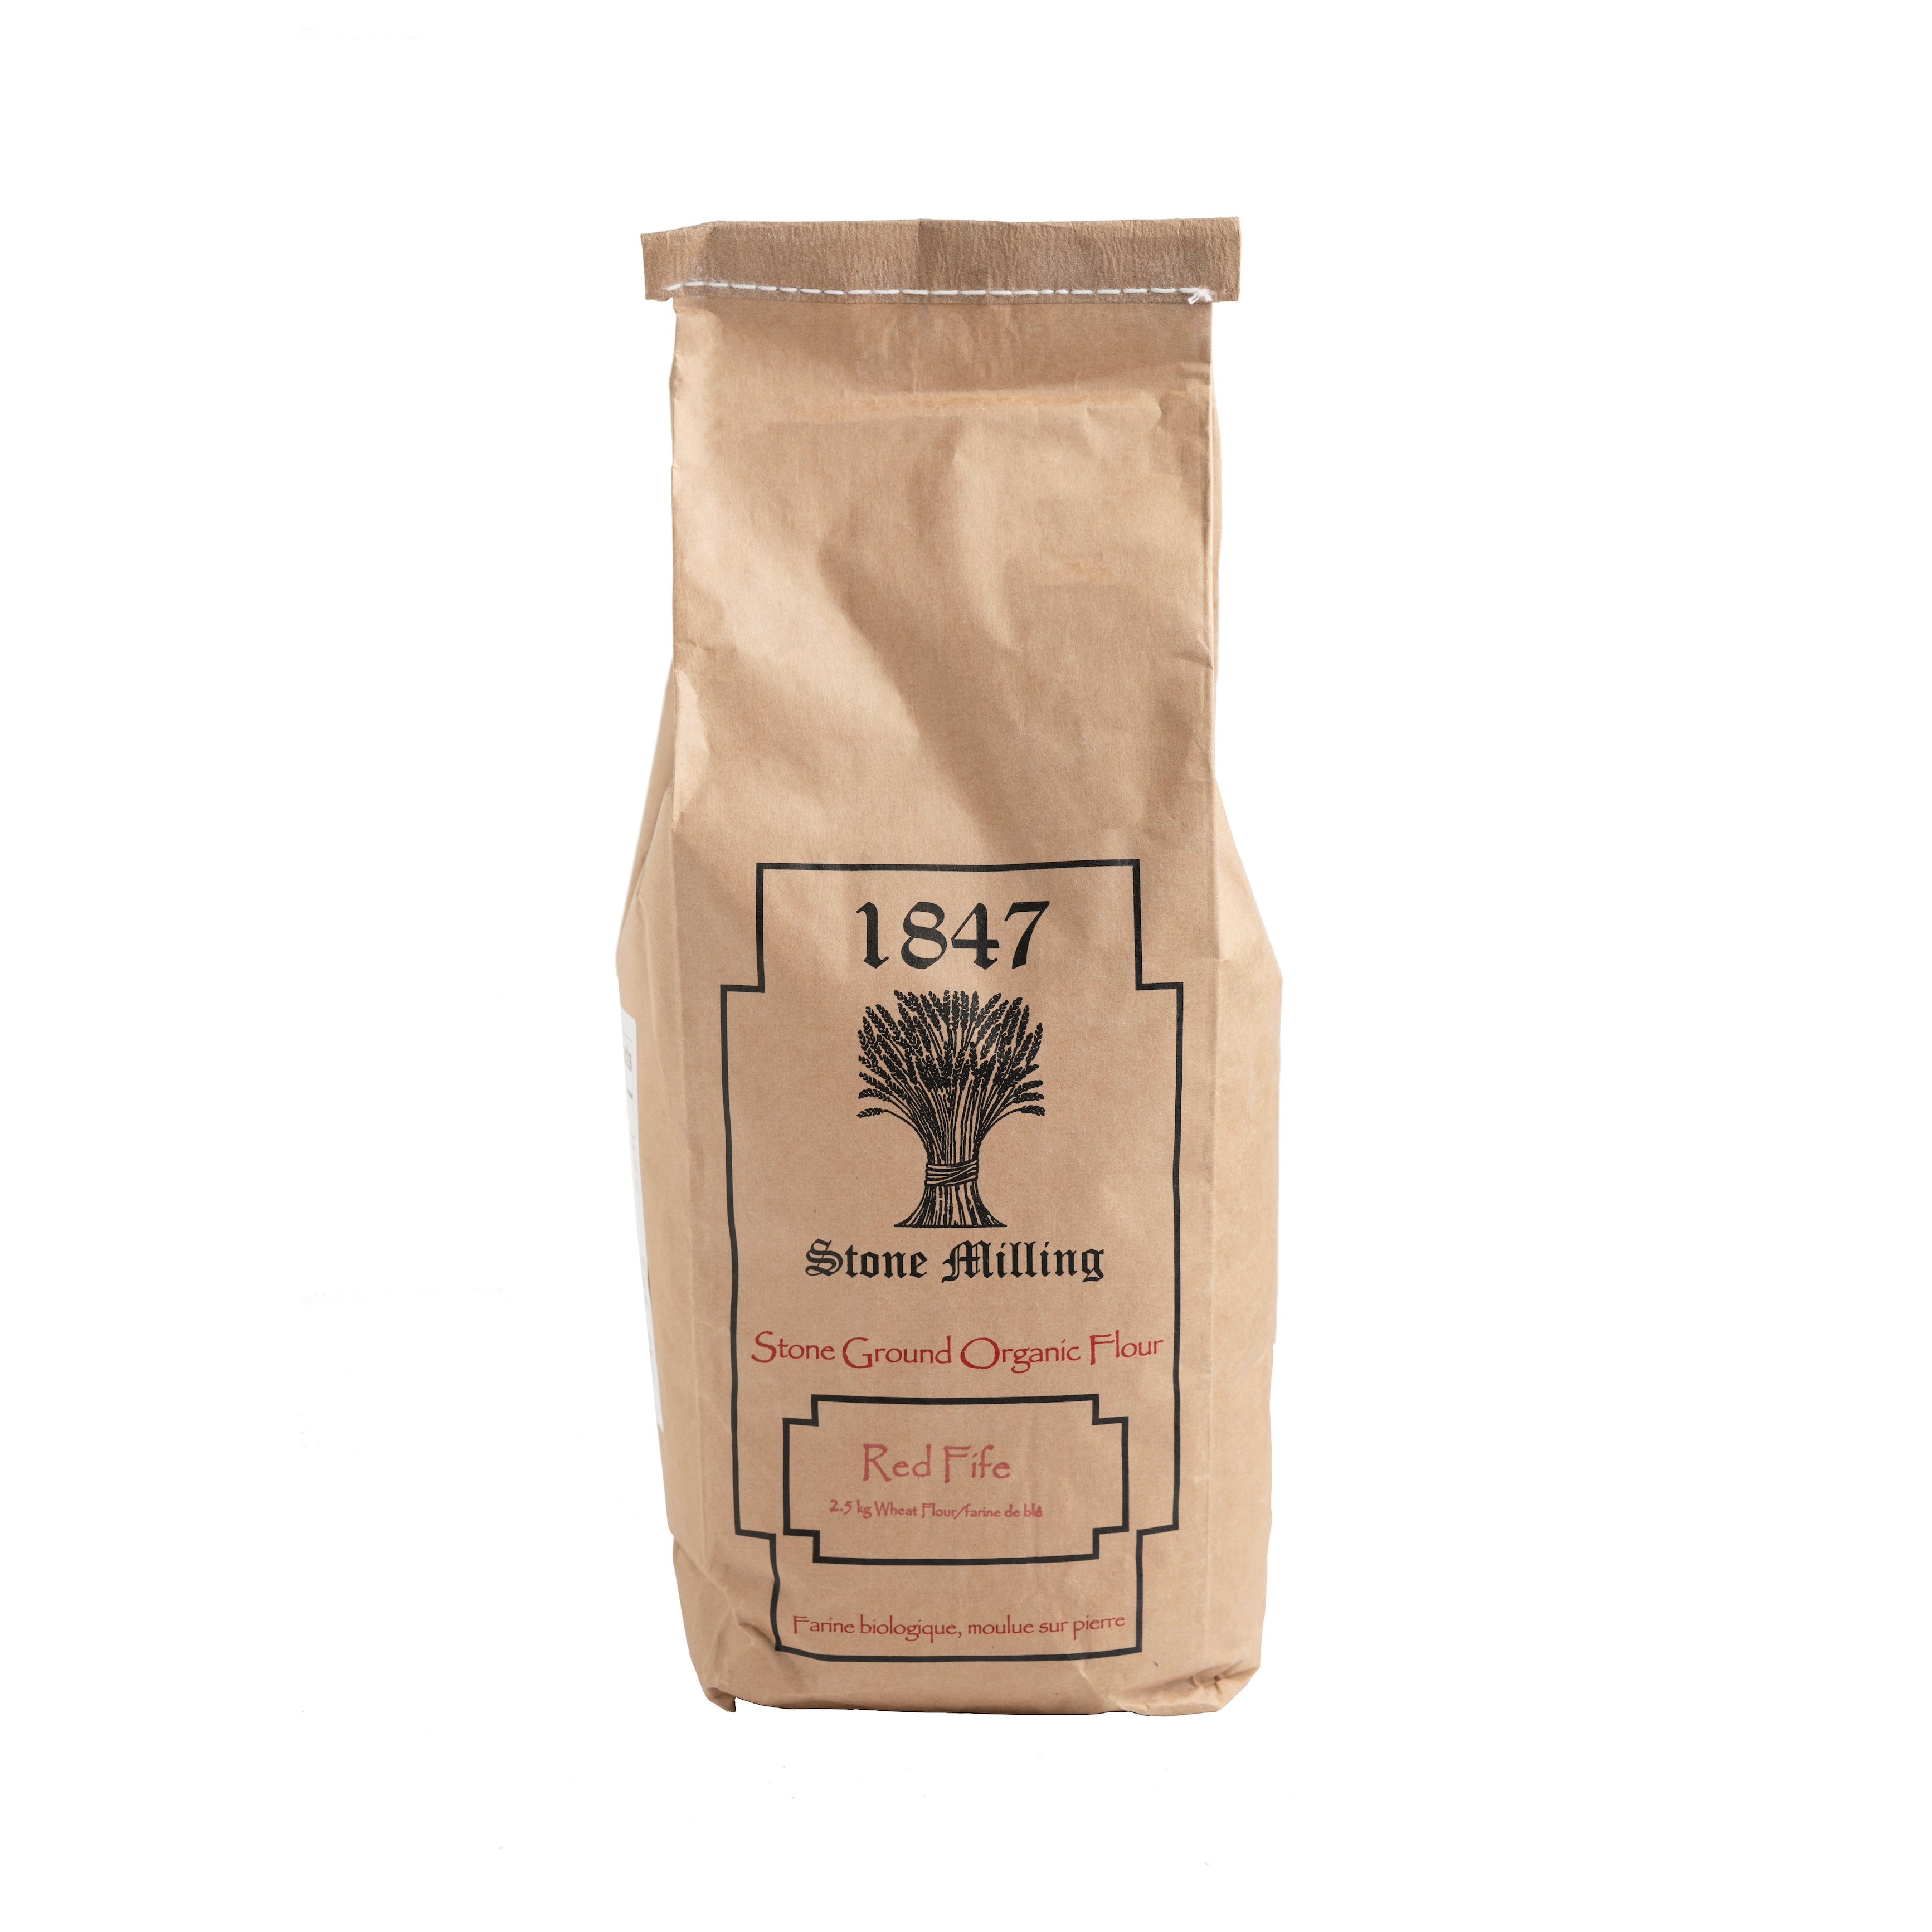 1847 STONE MILLING Organic Unbleached Red Rife Flour, 2.5kg